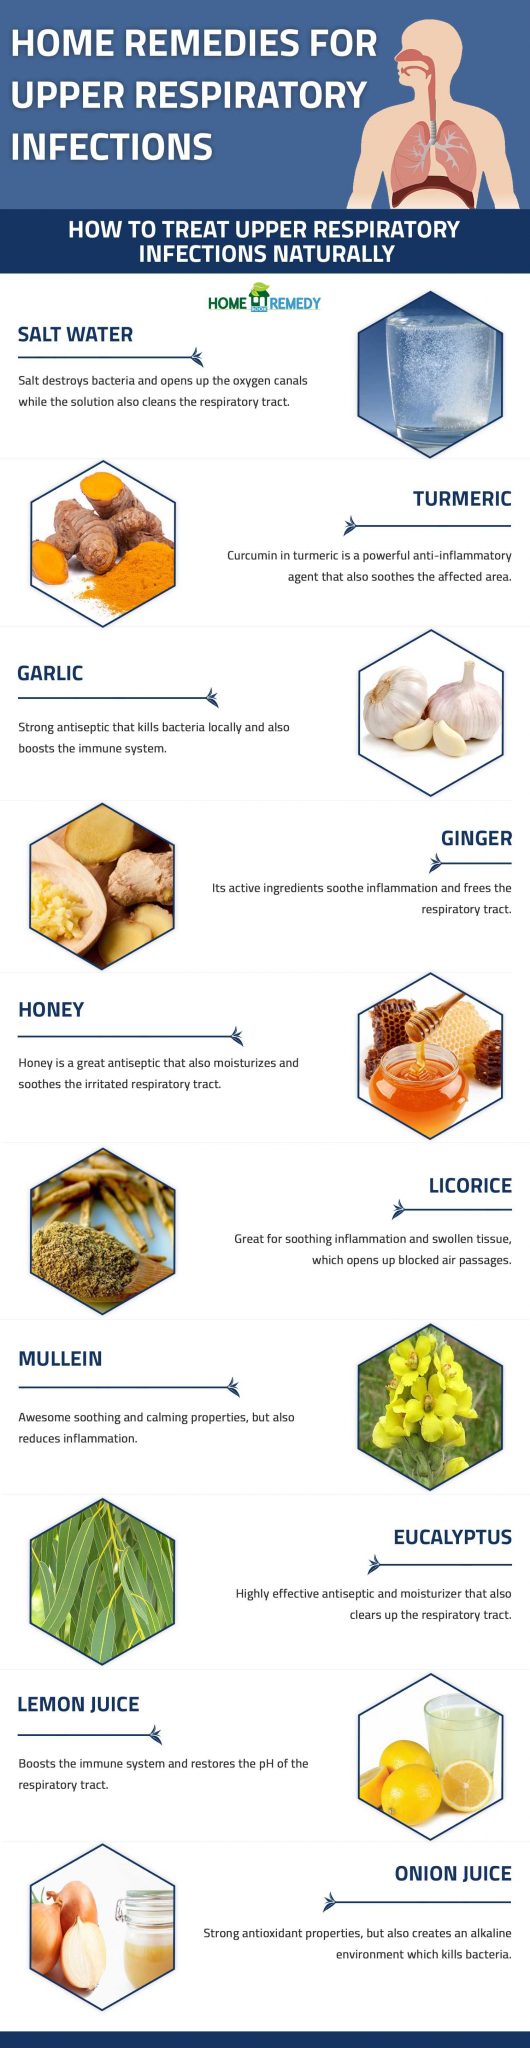 home remedies for upper respiratory infections infographic